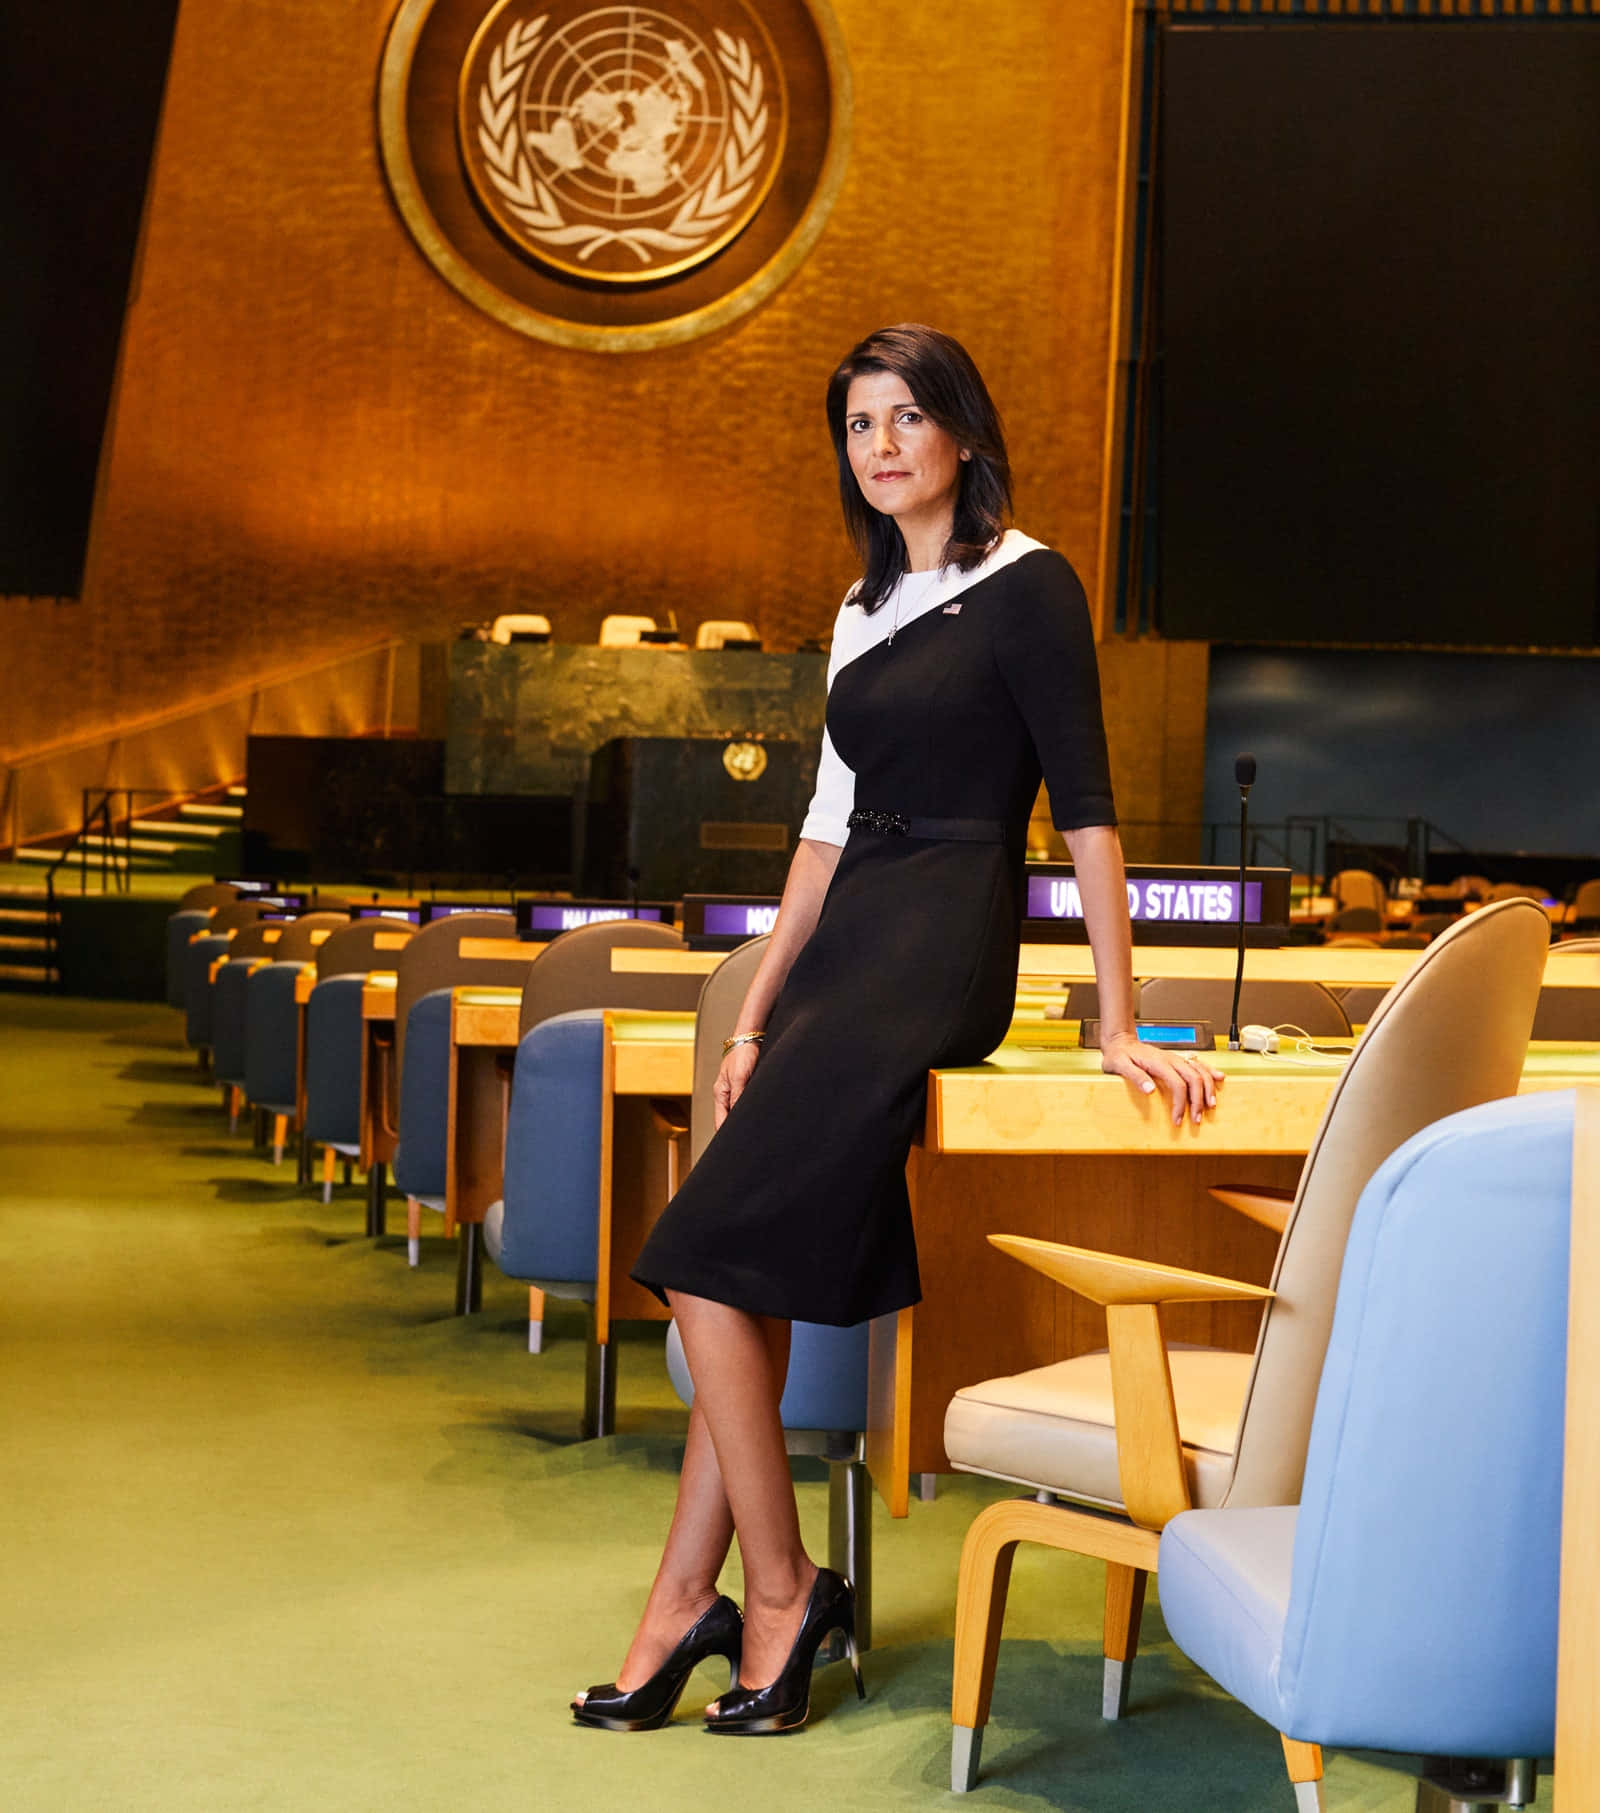 Nikki Haley confidently posing beside a table in a stylish outfit. Wallpaper